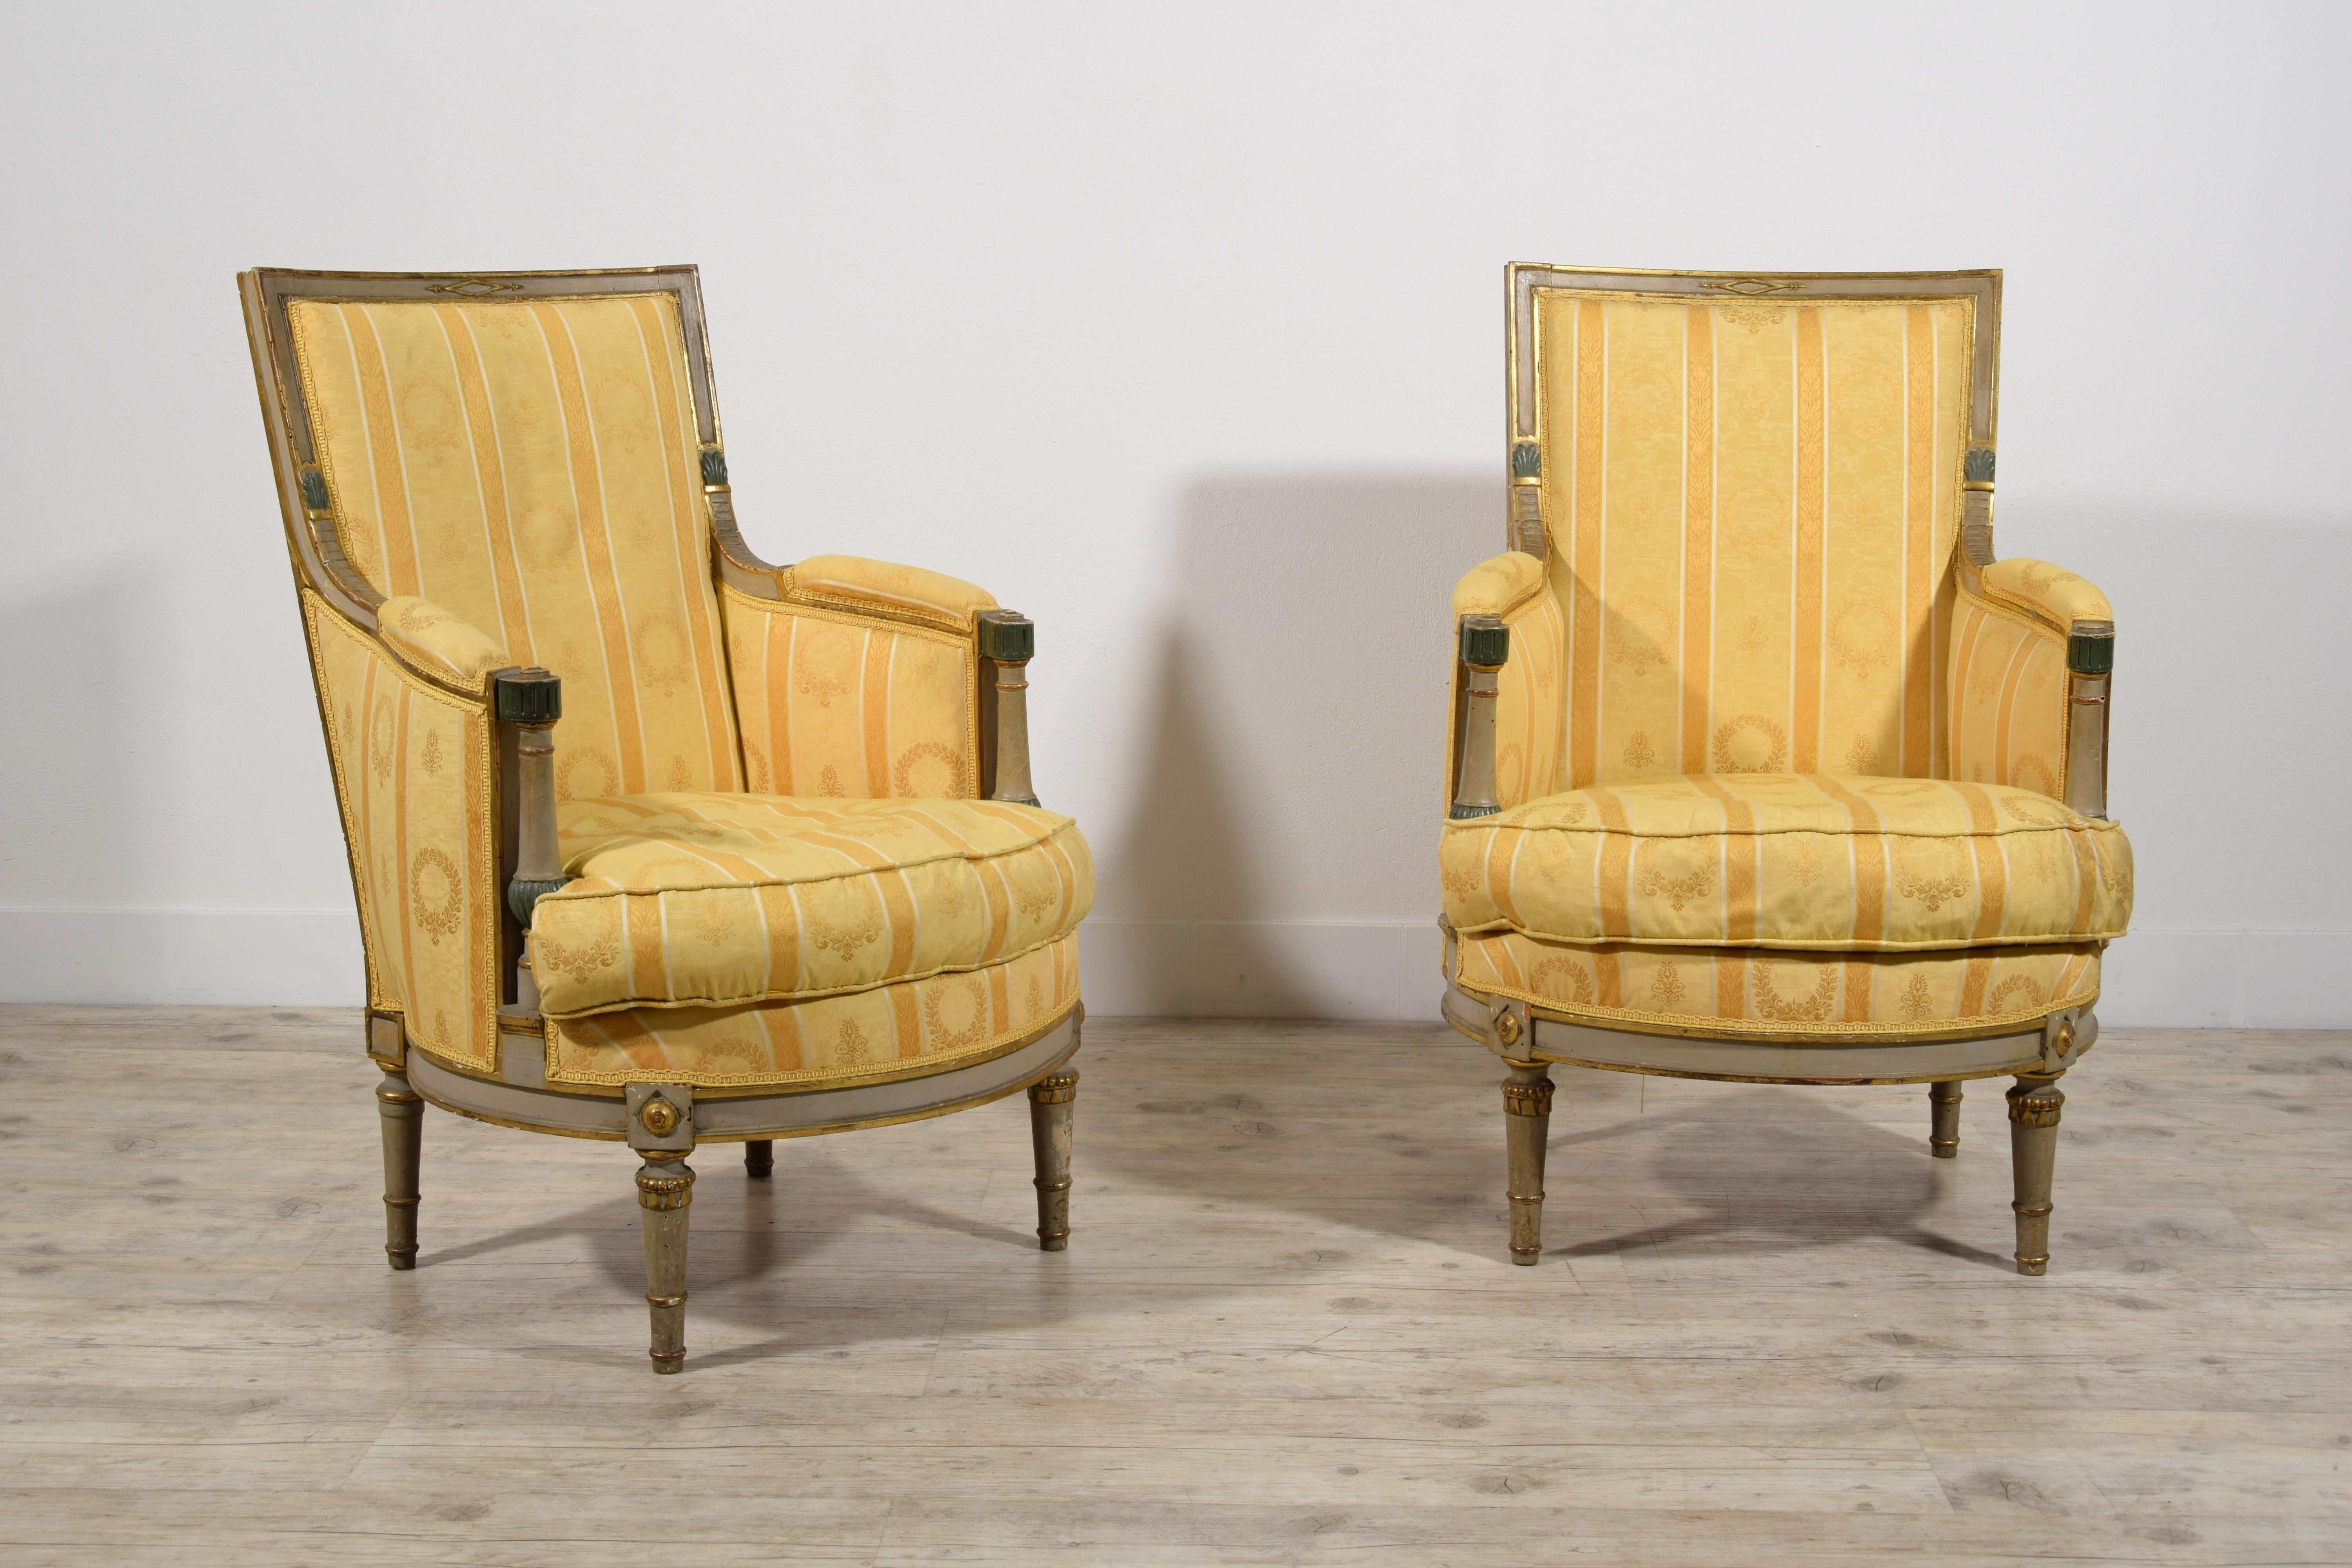 19th Century, Pair of French Lacquered and Giltwood Armchairs For Sale 2